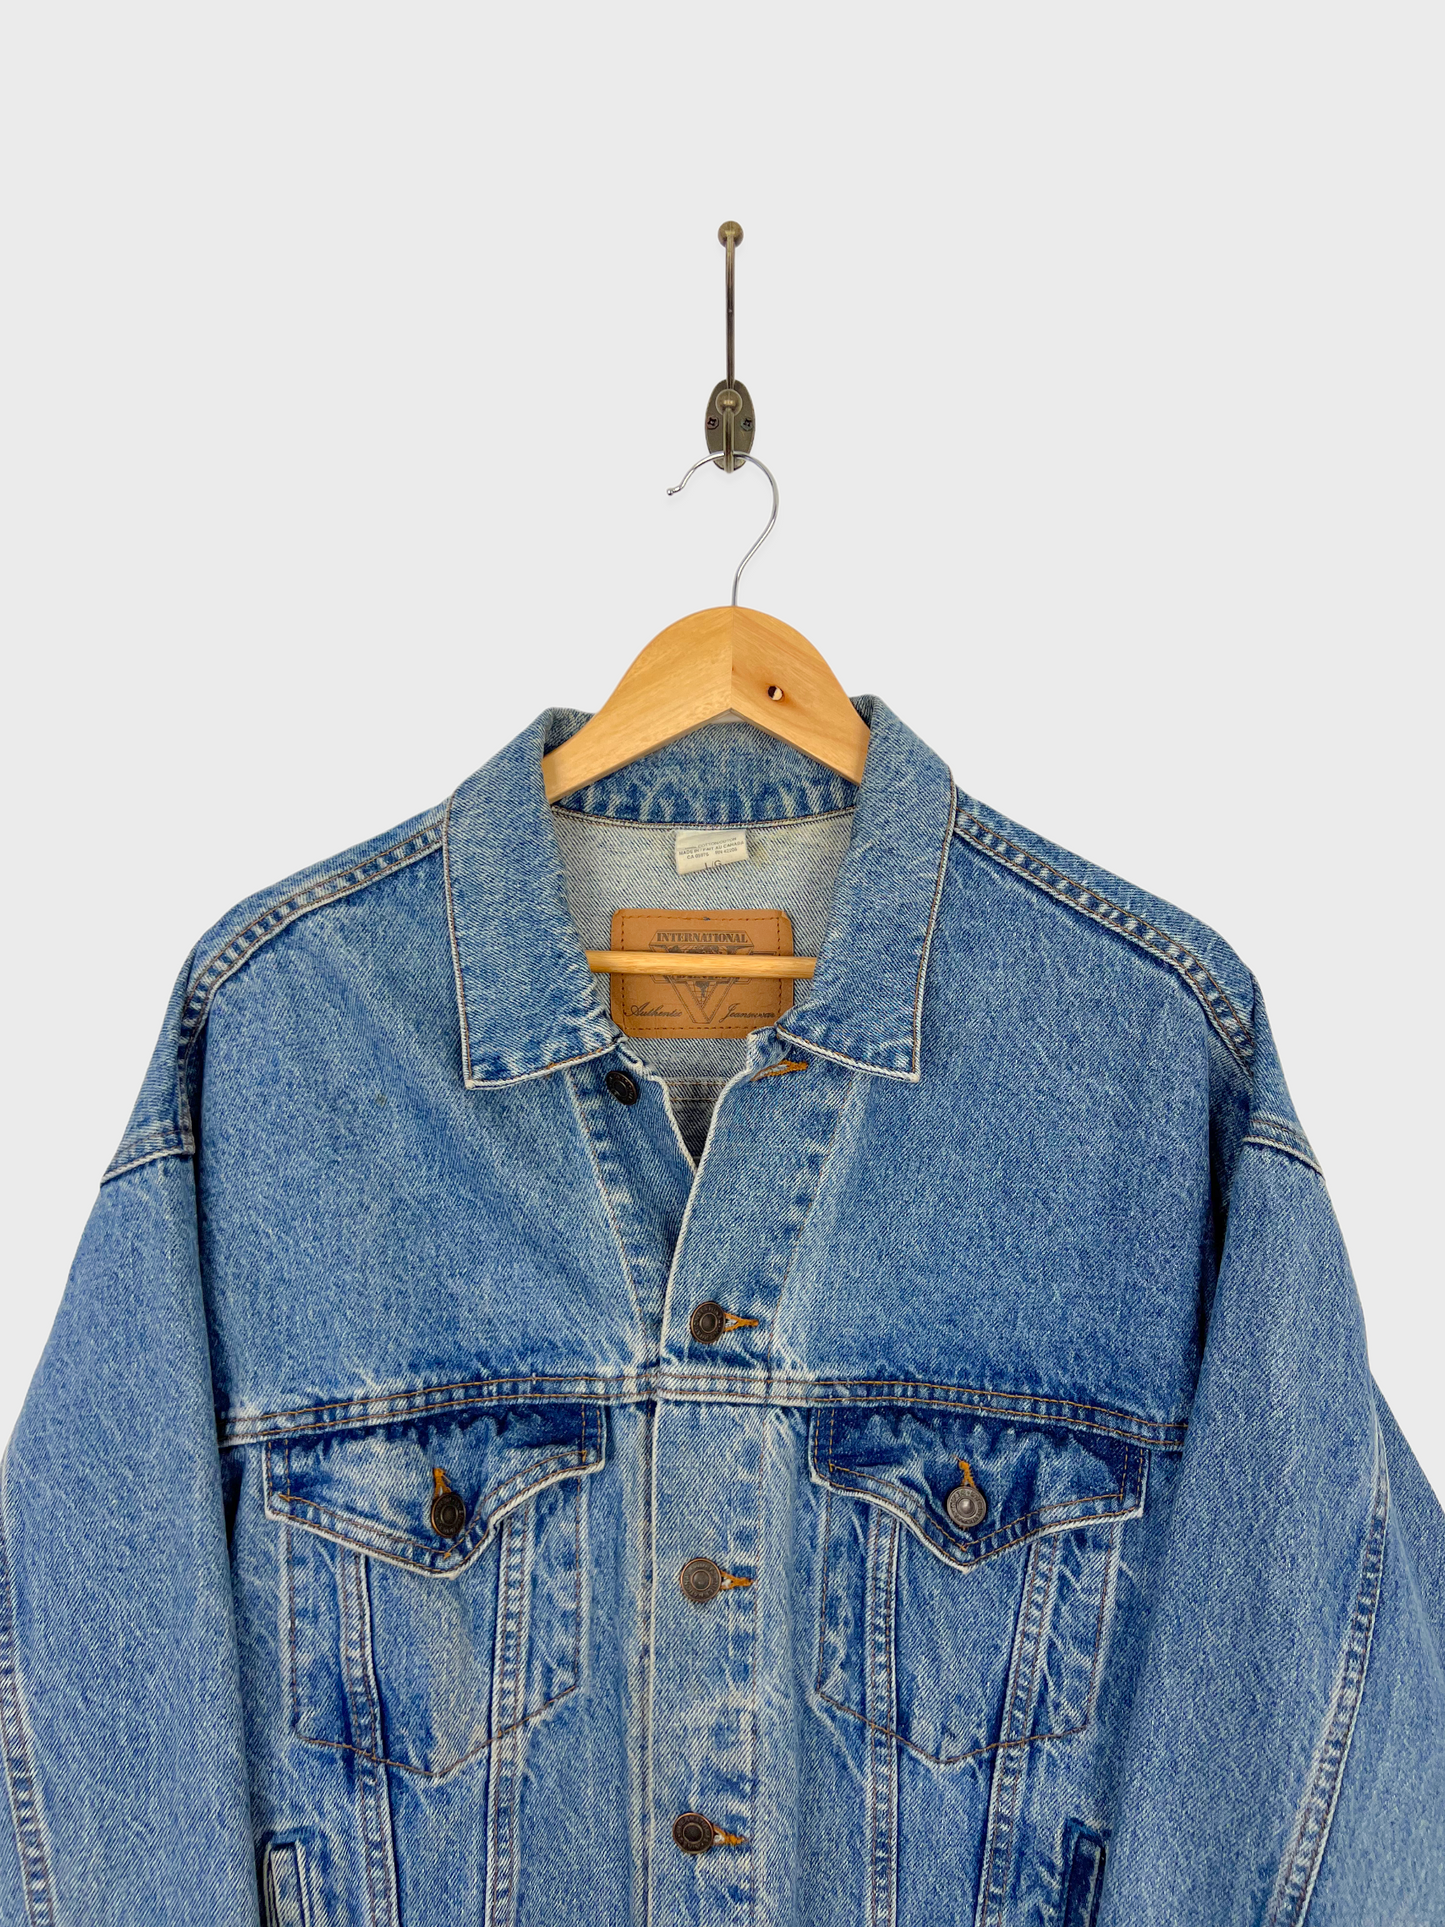 90's Wells Fargo & Co. Canada Made Embroidered Denim Jacket Size 12